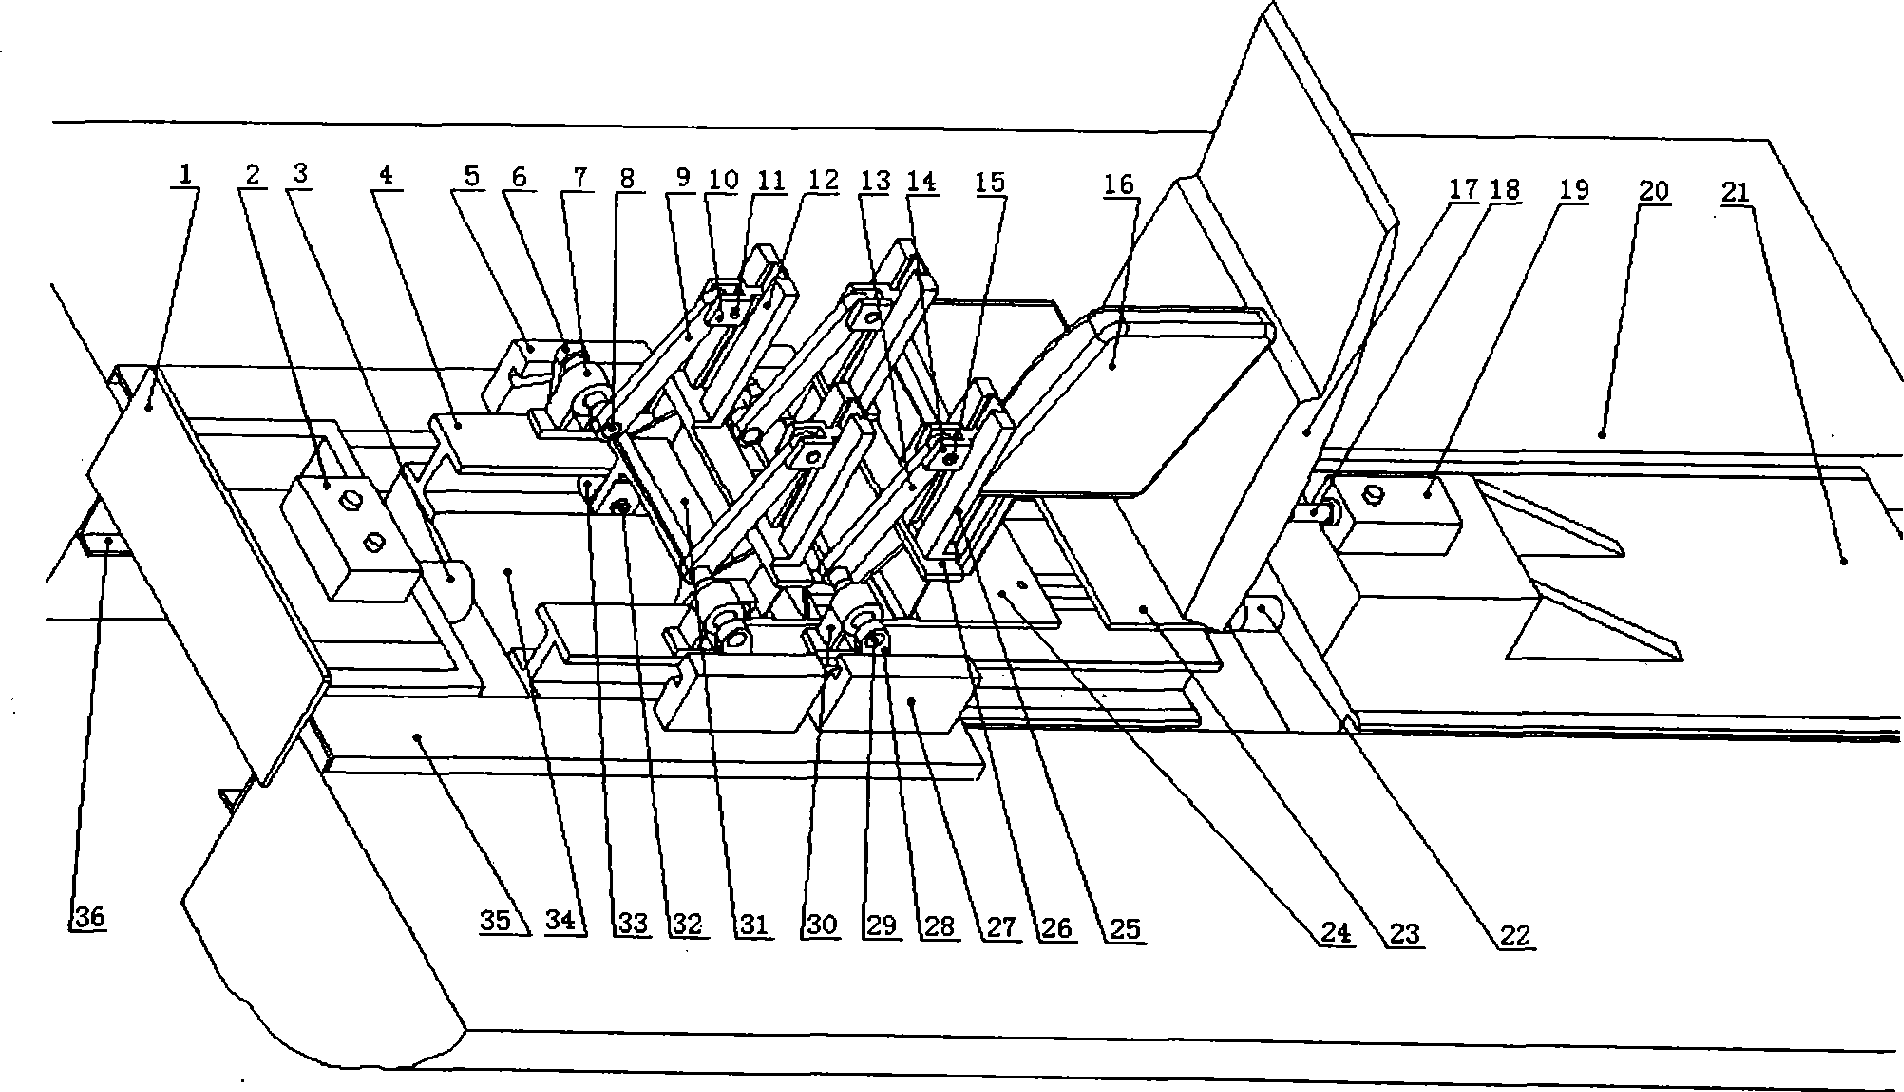 Simulation test device for automobile side collision